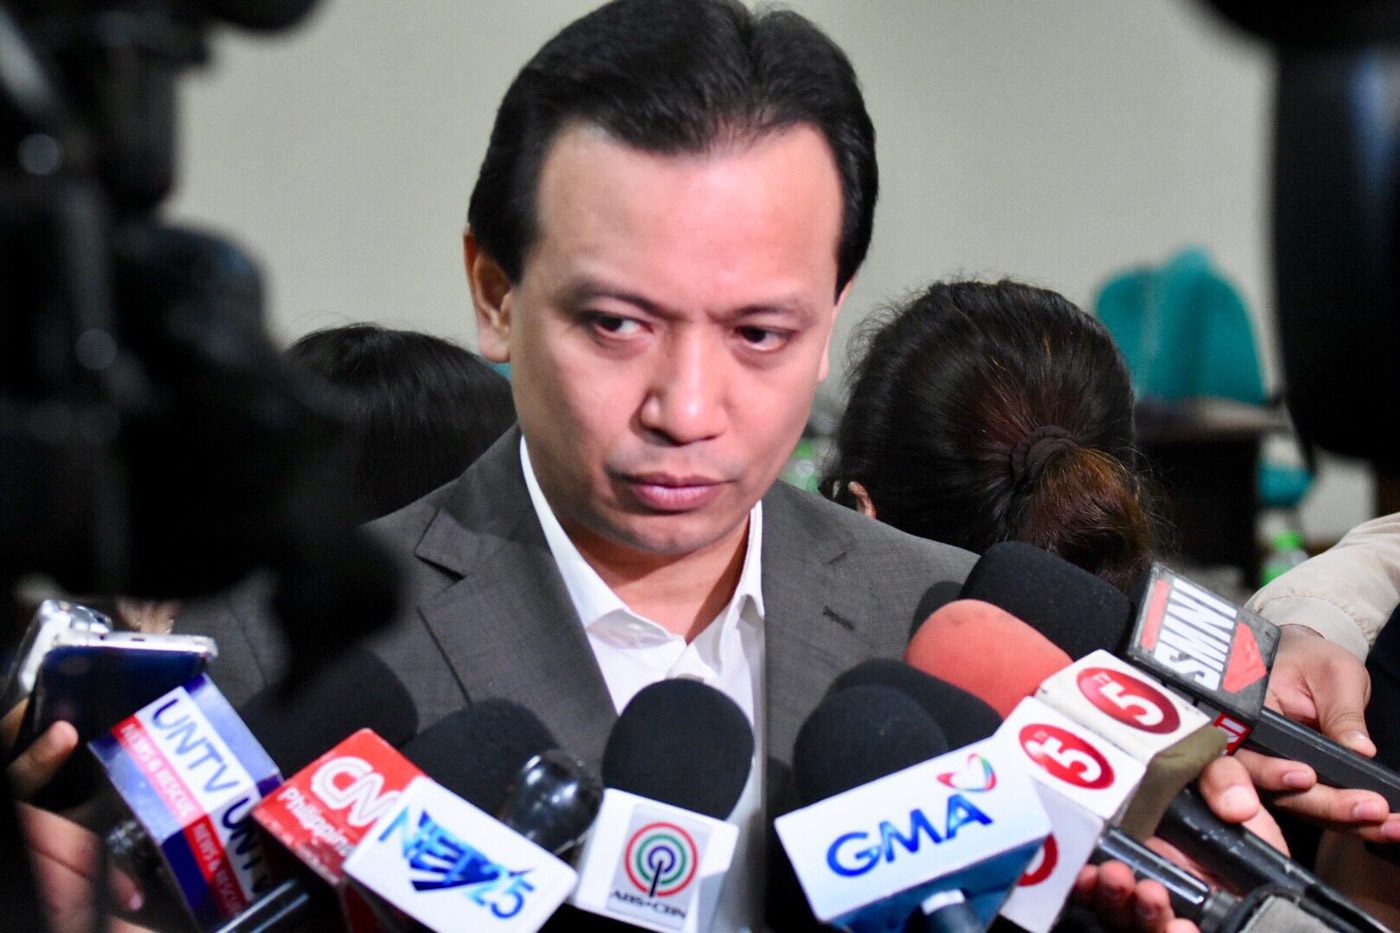 Without amnesty, Trillanes’ retirement voided too